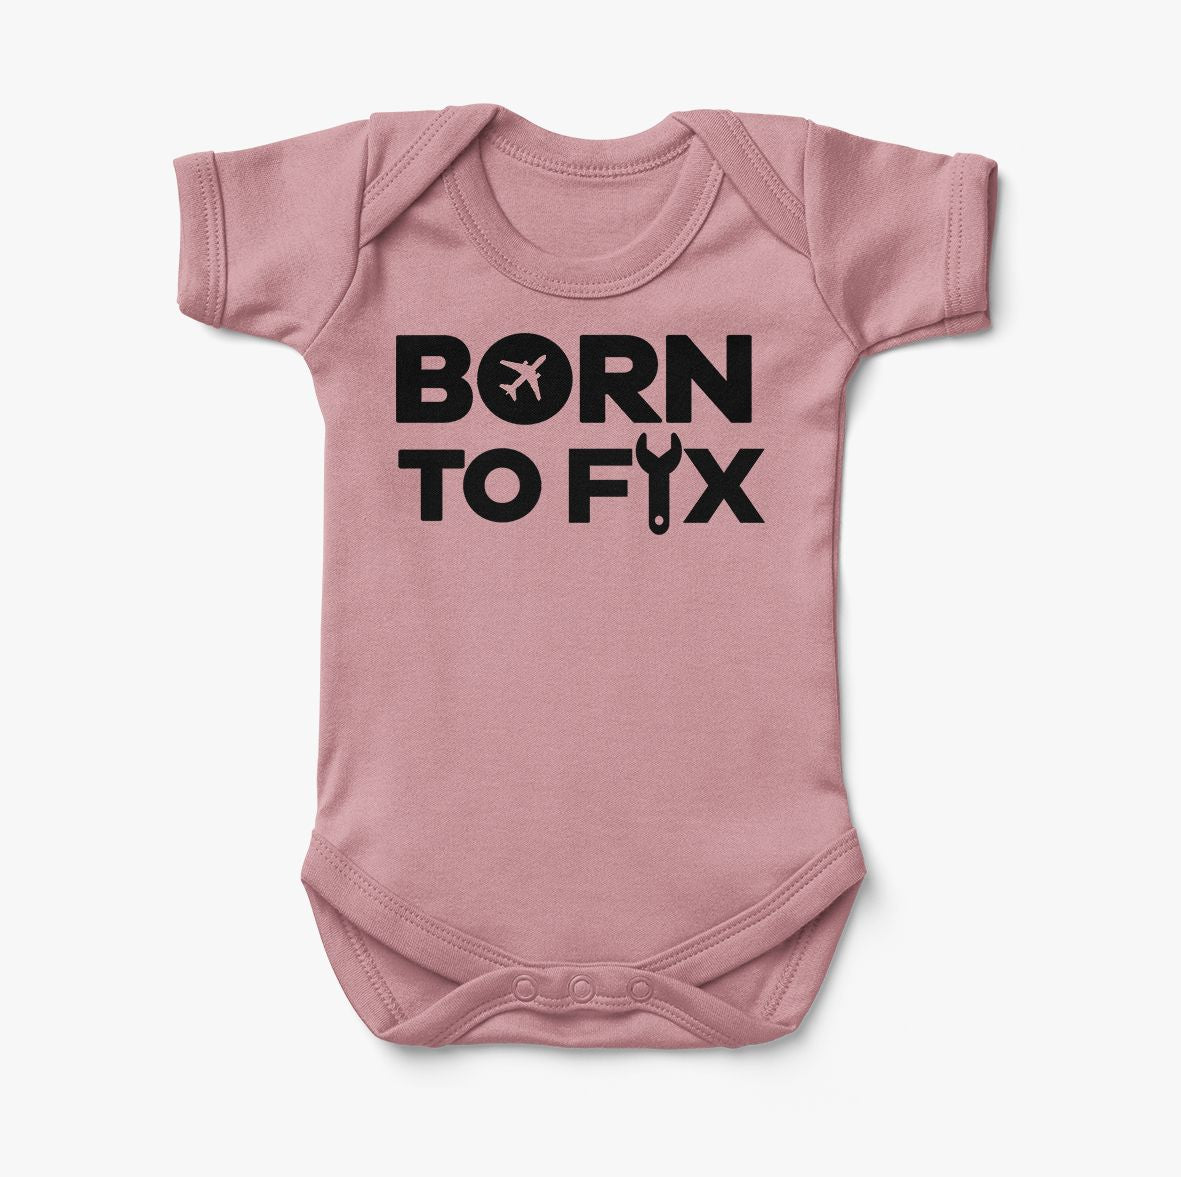 Born To Fix Airplanes Designed Baby Bodysuits